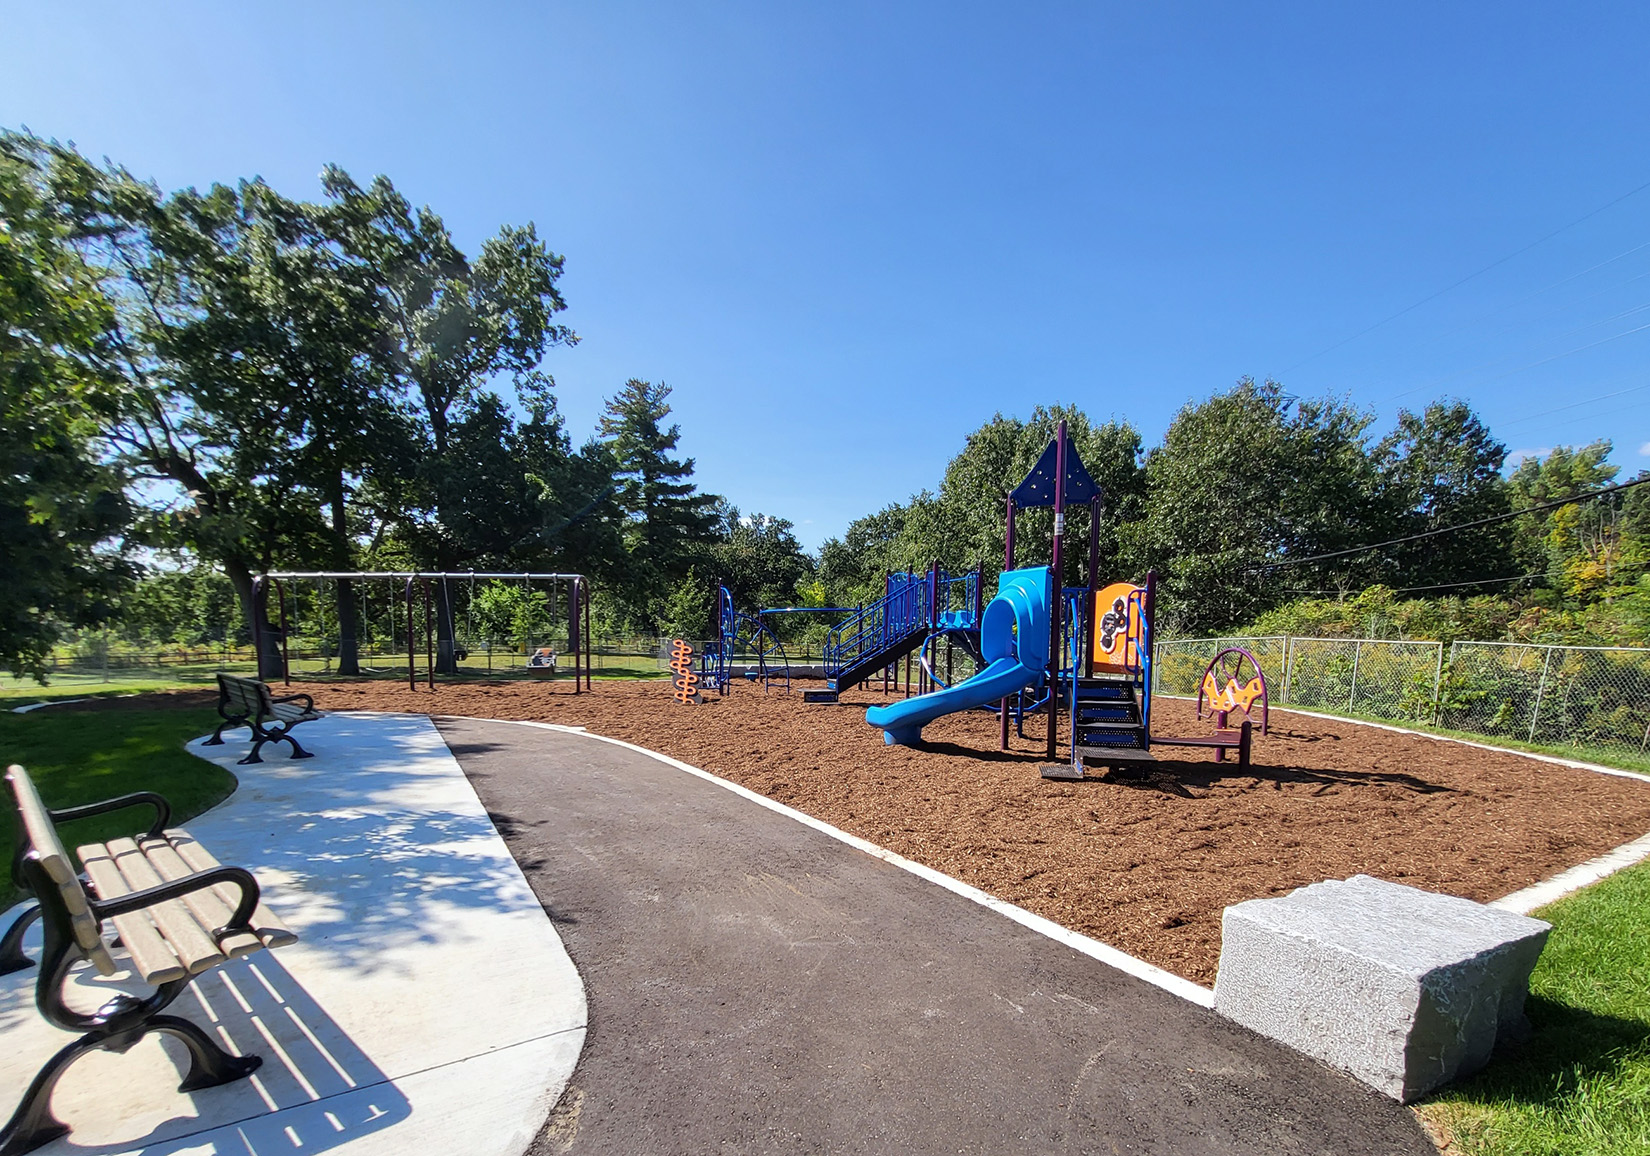 Photo of the new Lambton Park playground looking west. There is a seating area with two park benches, armourstone seating, and a junior play structure with a curved slide in the foreground, and a swing set, a stand-alone climber, and a senior play structure visible in the background.